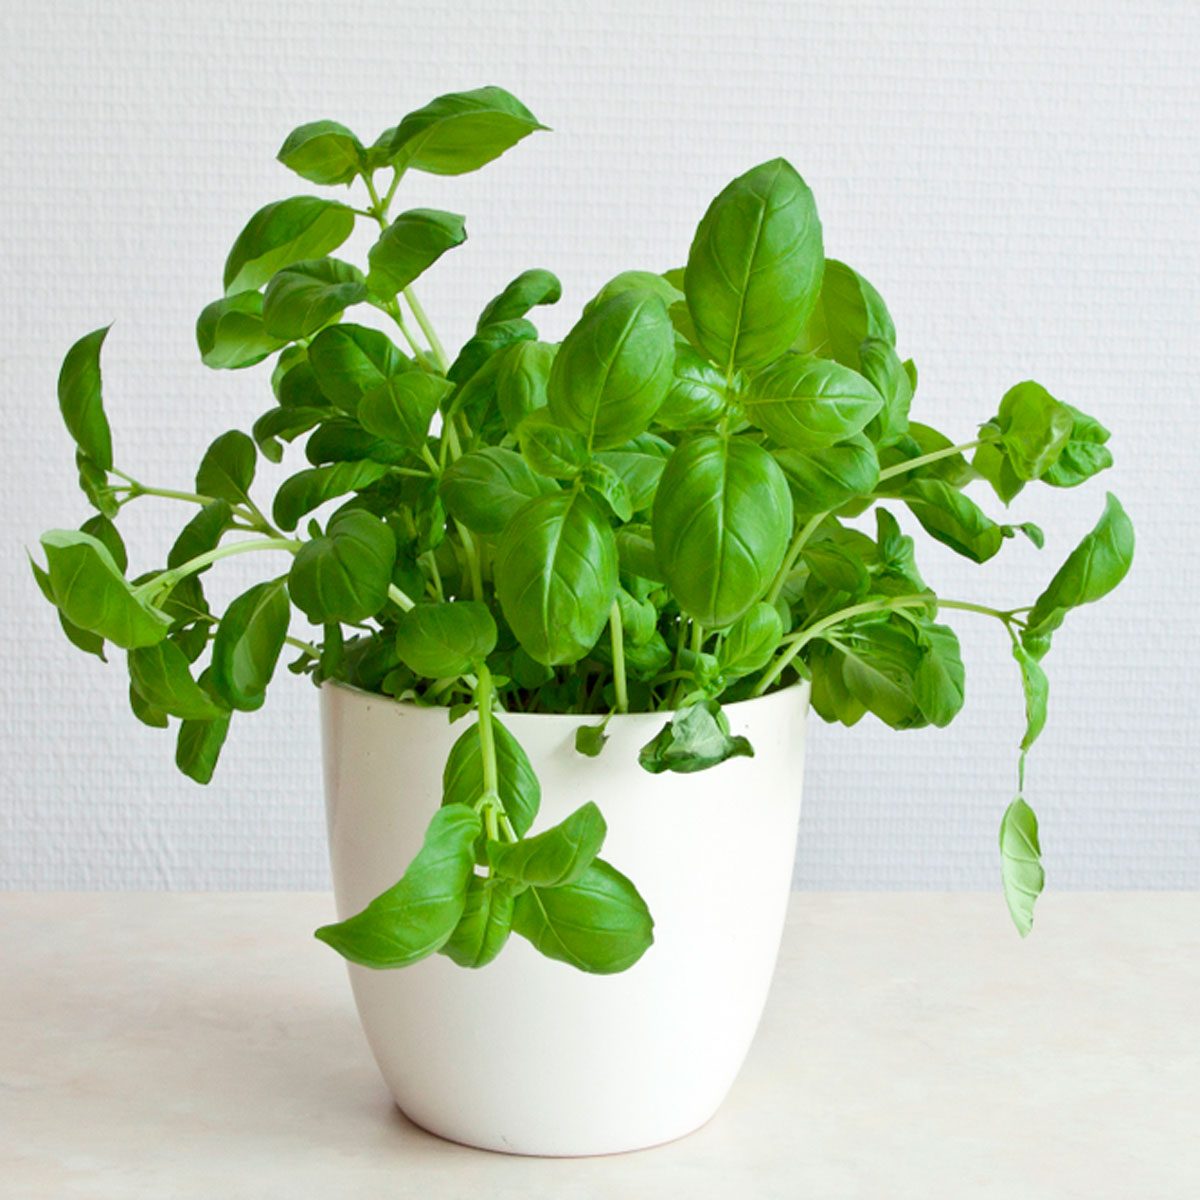 Outdoor Plants That Can Survive and Thrive Indoors | The Family Handyman